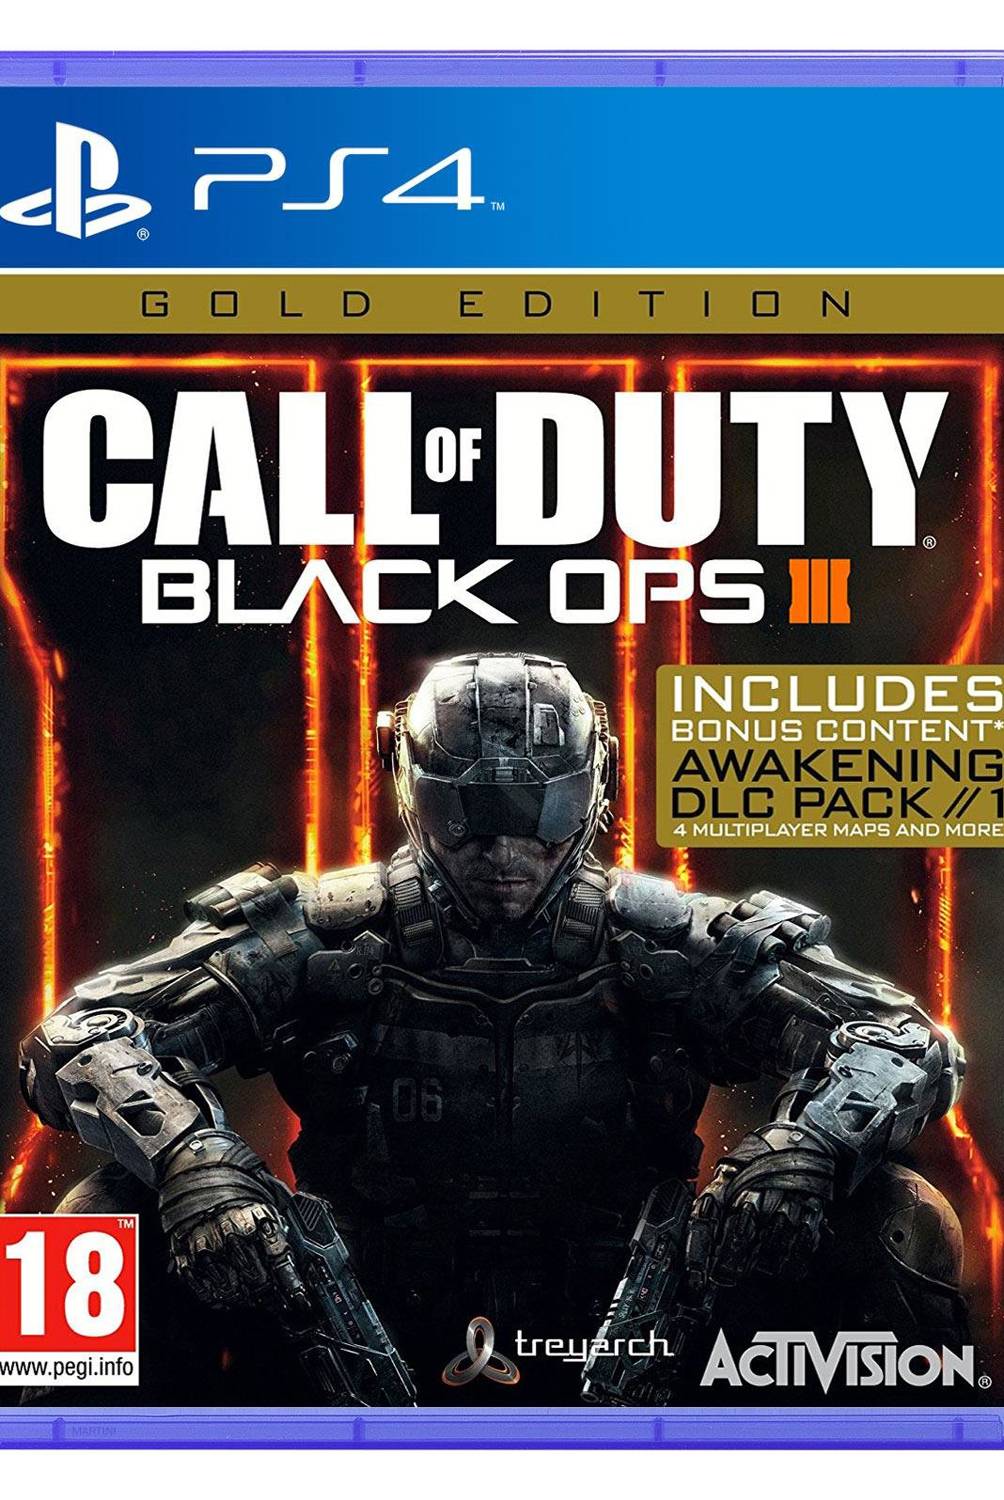 PLAYSTATION - Videojuego Call Of Duty Black Ops Iii Gold Edition - PS4